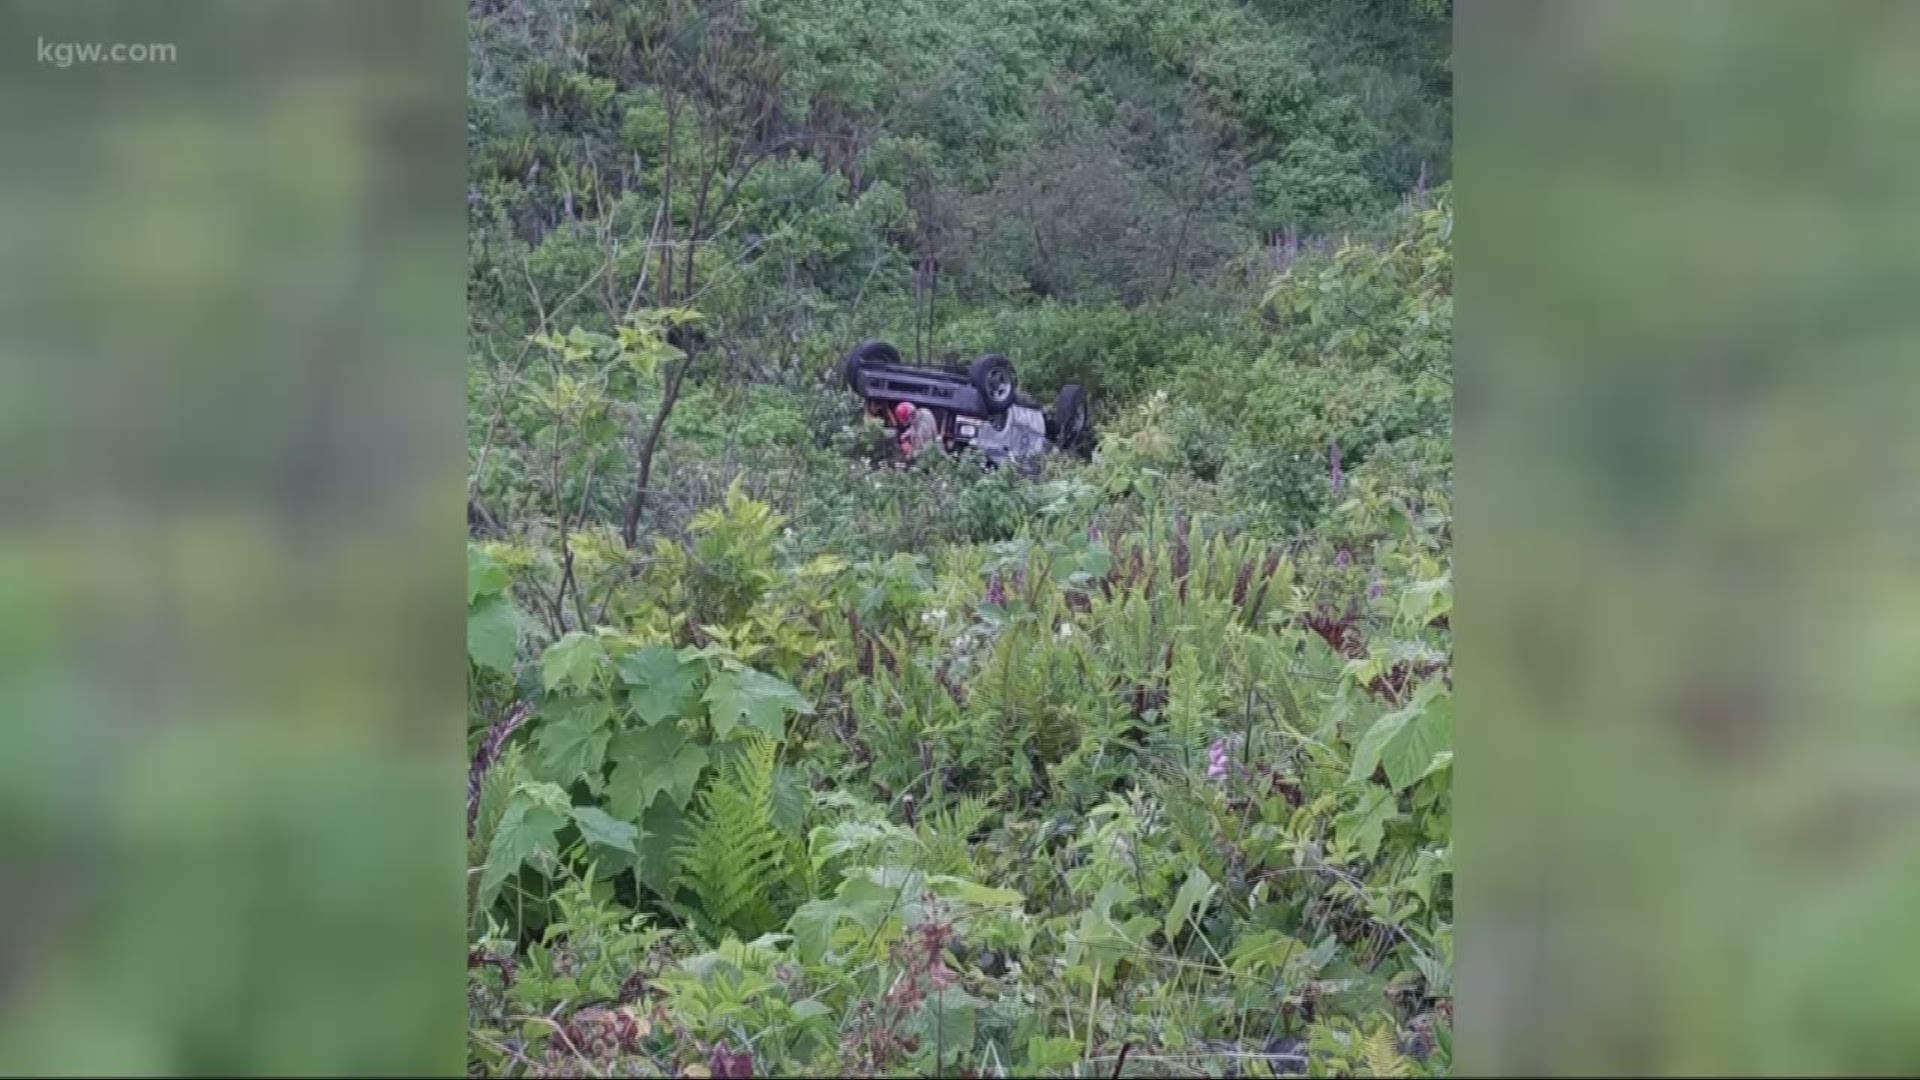 DUII suspect kidnaps two people, leaves one dead after crashing down hillside in Lincoln County, deputies say